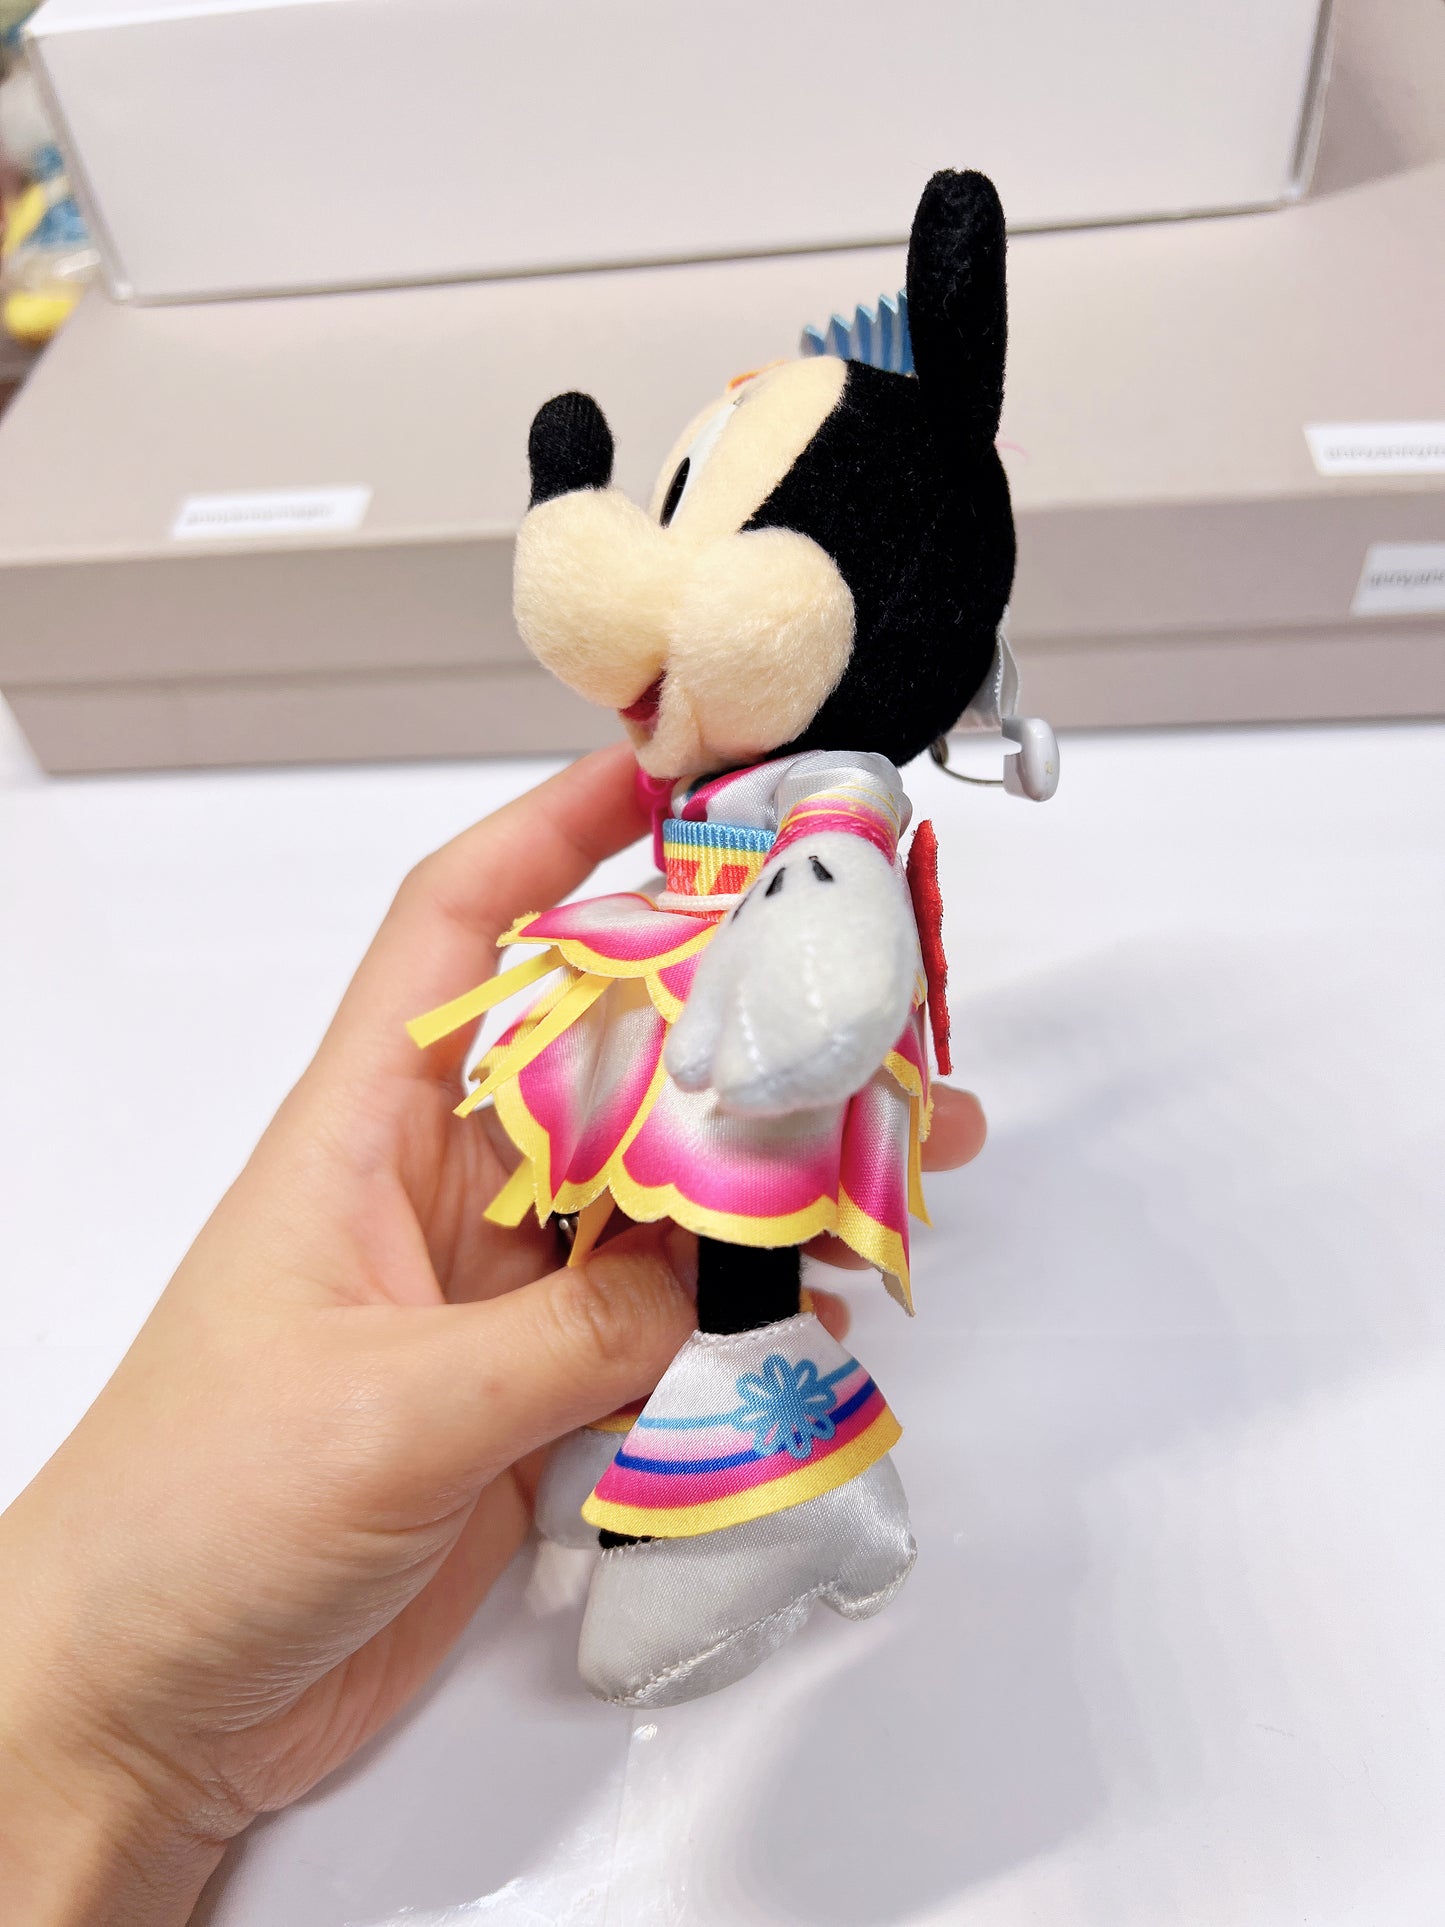 2016 Disney Tokyo Resort flower dress Minnie plush badge keychain Preowned in excellent condition available on hand